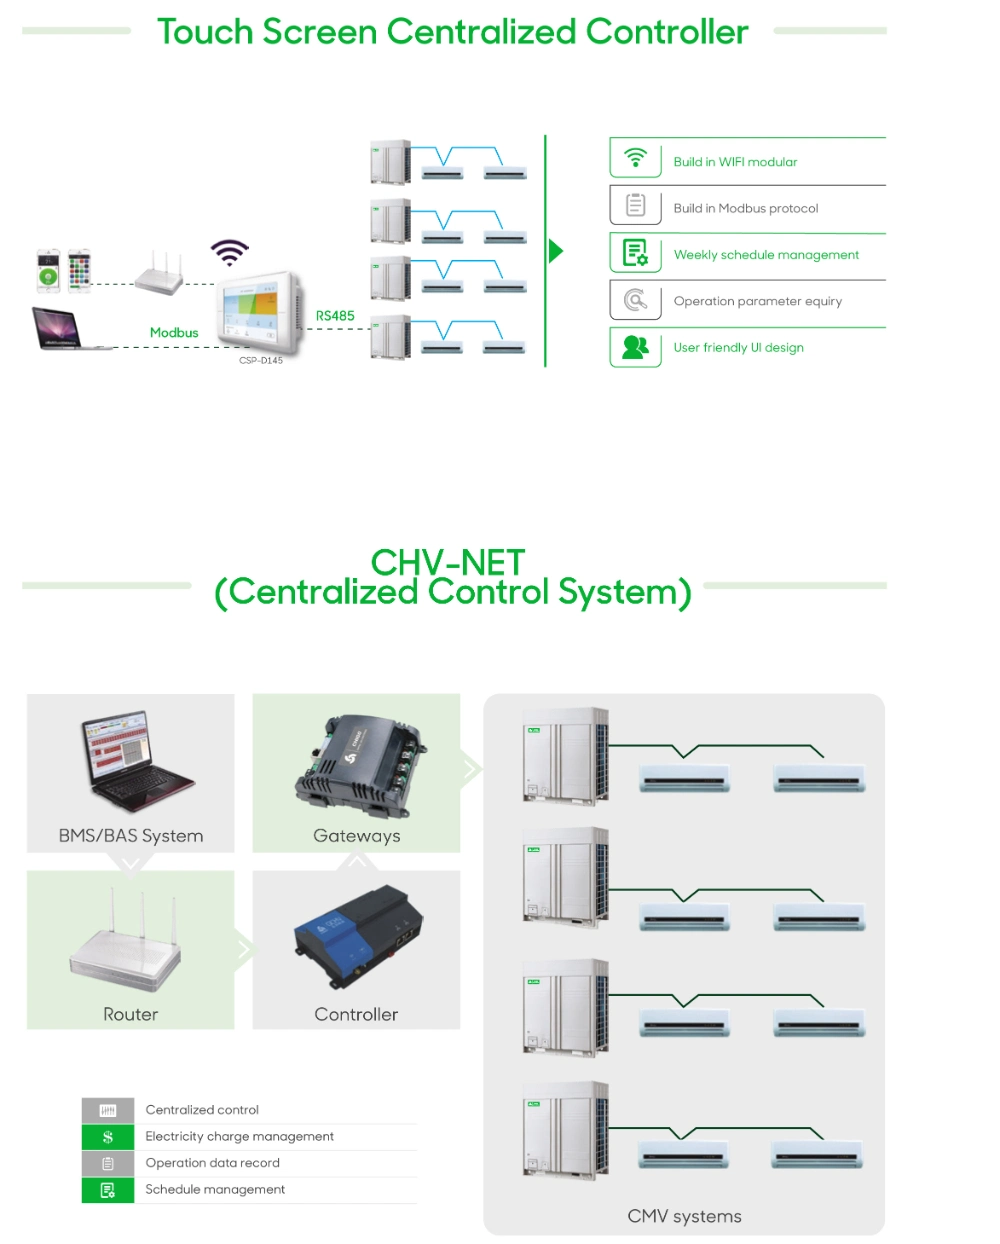 64 Air Conditioners Group Control Centralized Controller for HVAC System